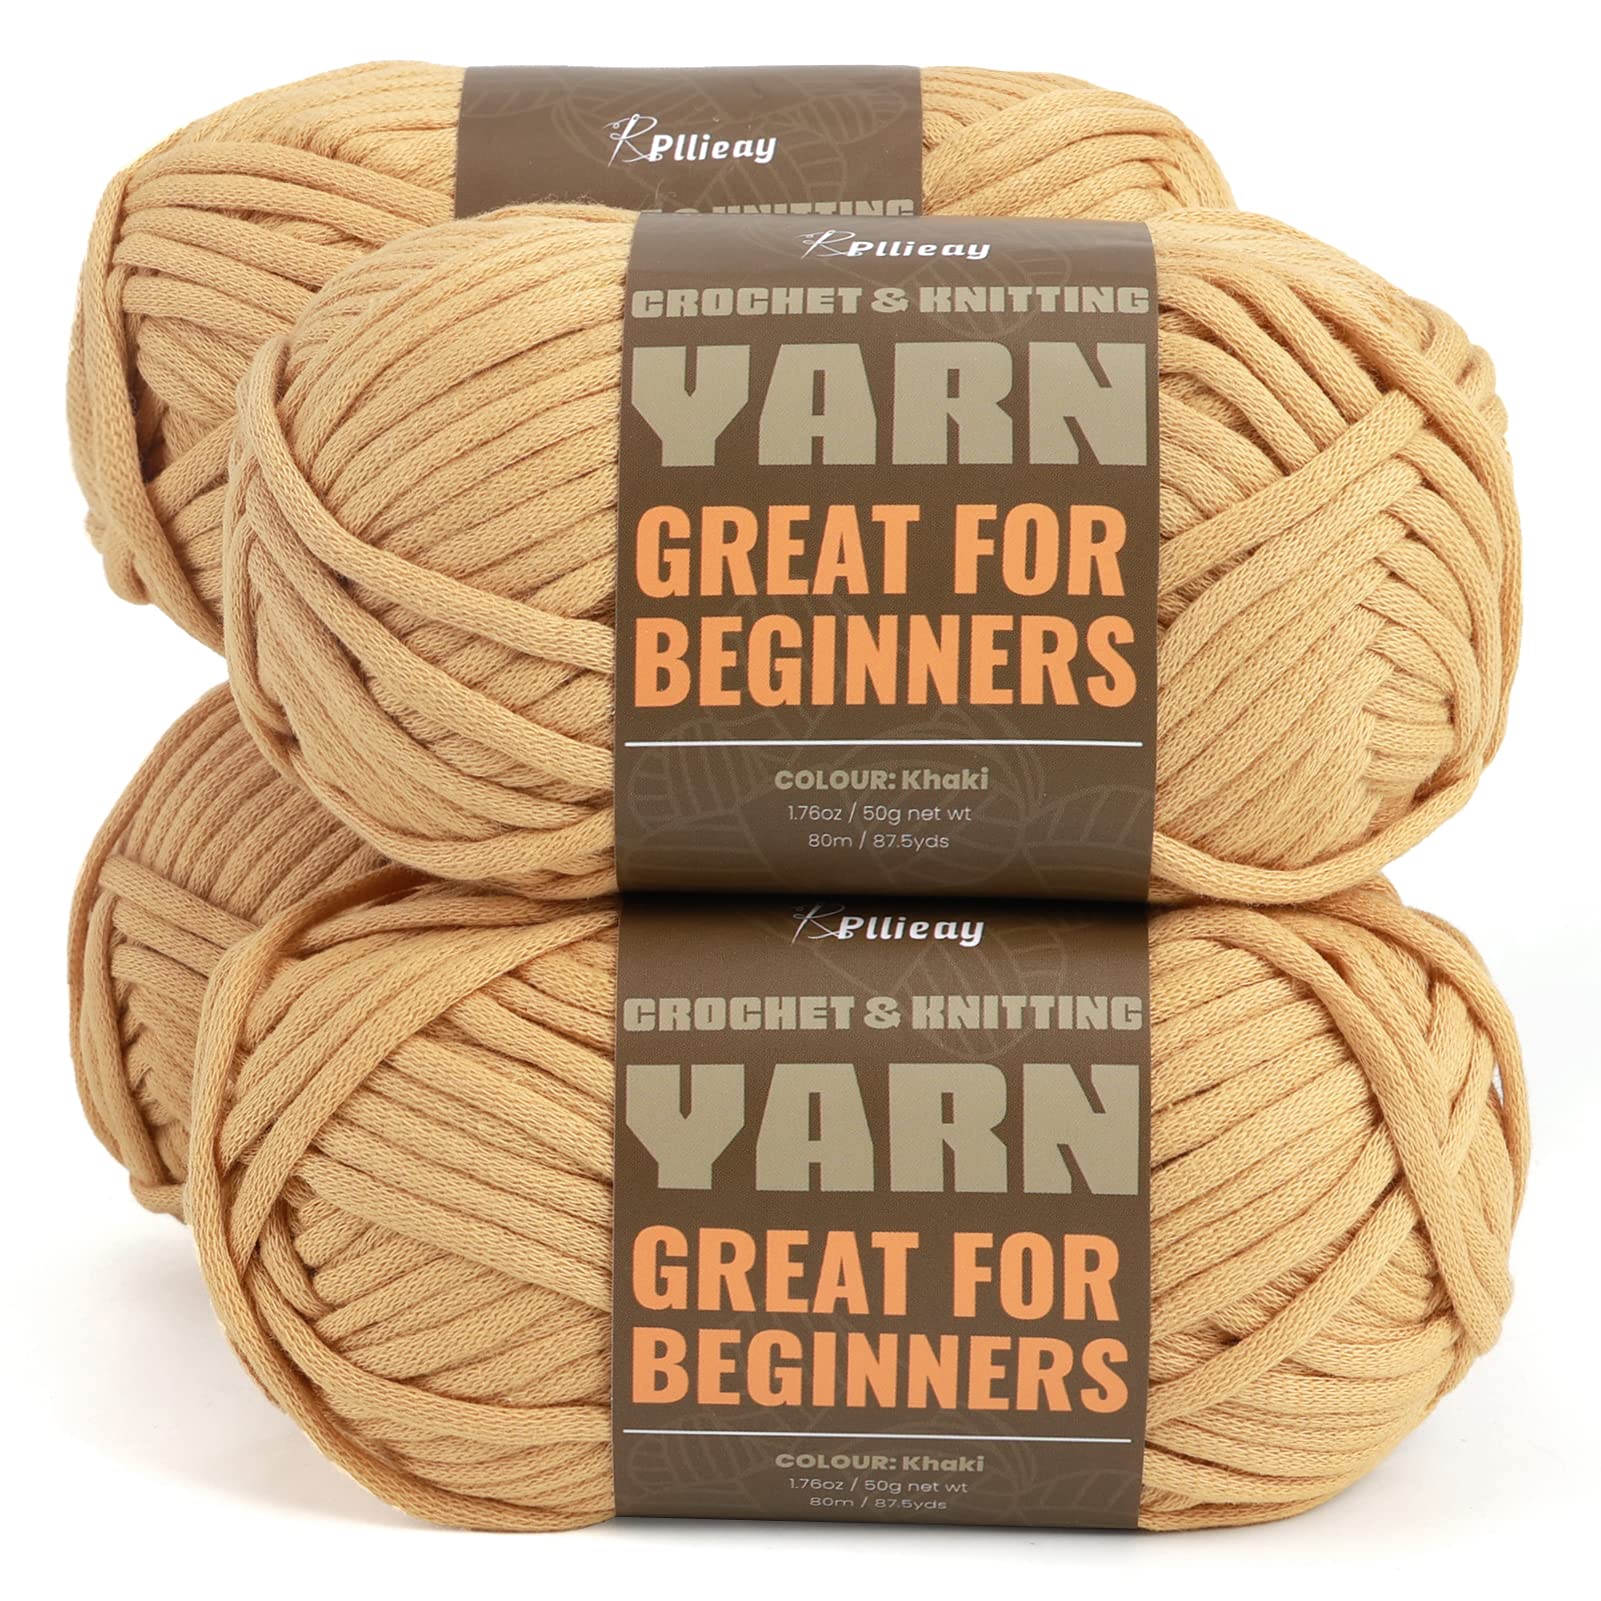 Pllieay Brown Cotton Yarn, 4x50g Crochet Yarn for Crocheting and Knitting,  Cotton Yarn for Beginners with Easy to See Stitches for Beginners